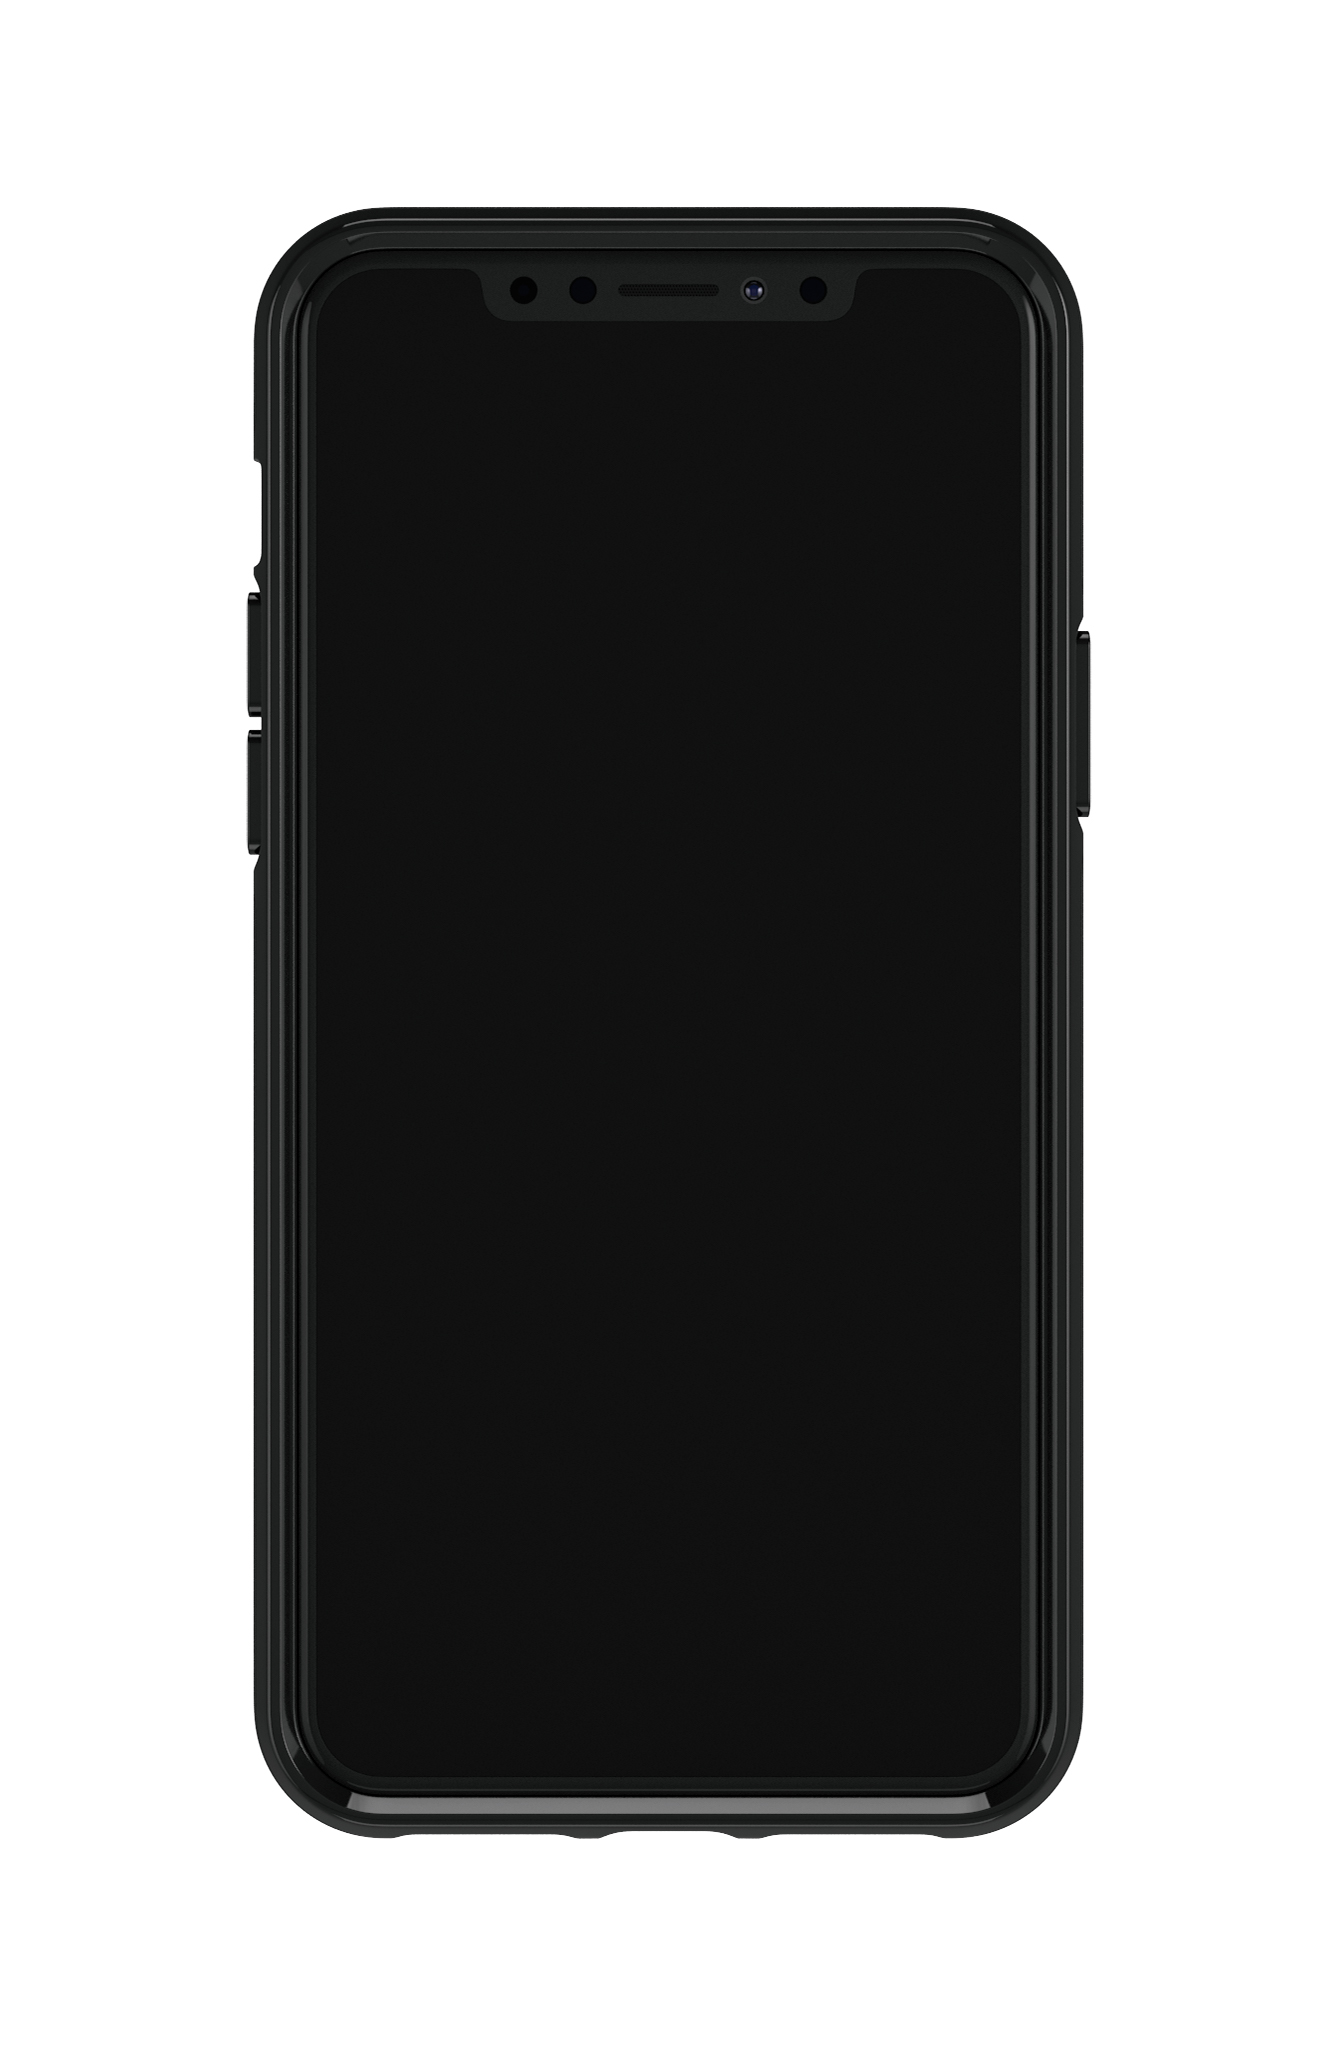 RICHMOND & FINCH Black Out IPHONE 11 APPLE, iPhone Pro, Backcover, 11 PRO, BLACK